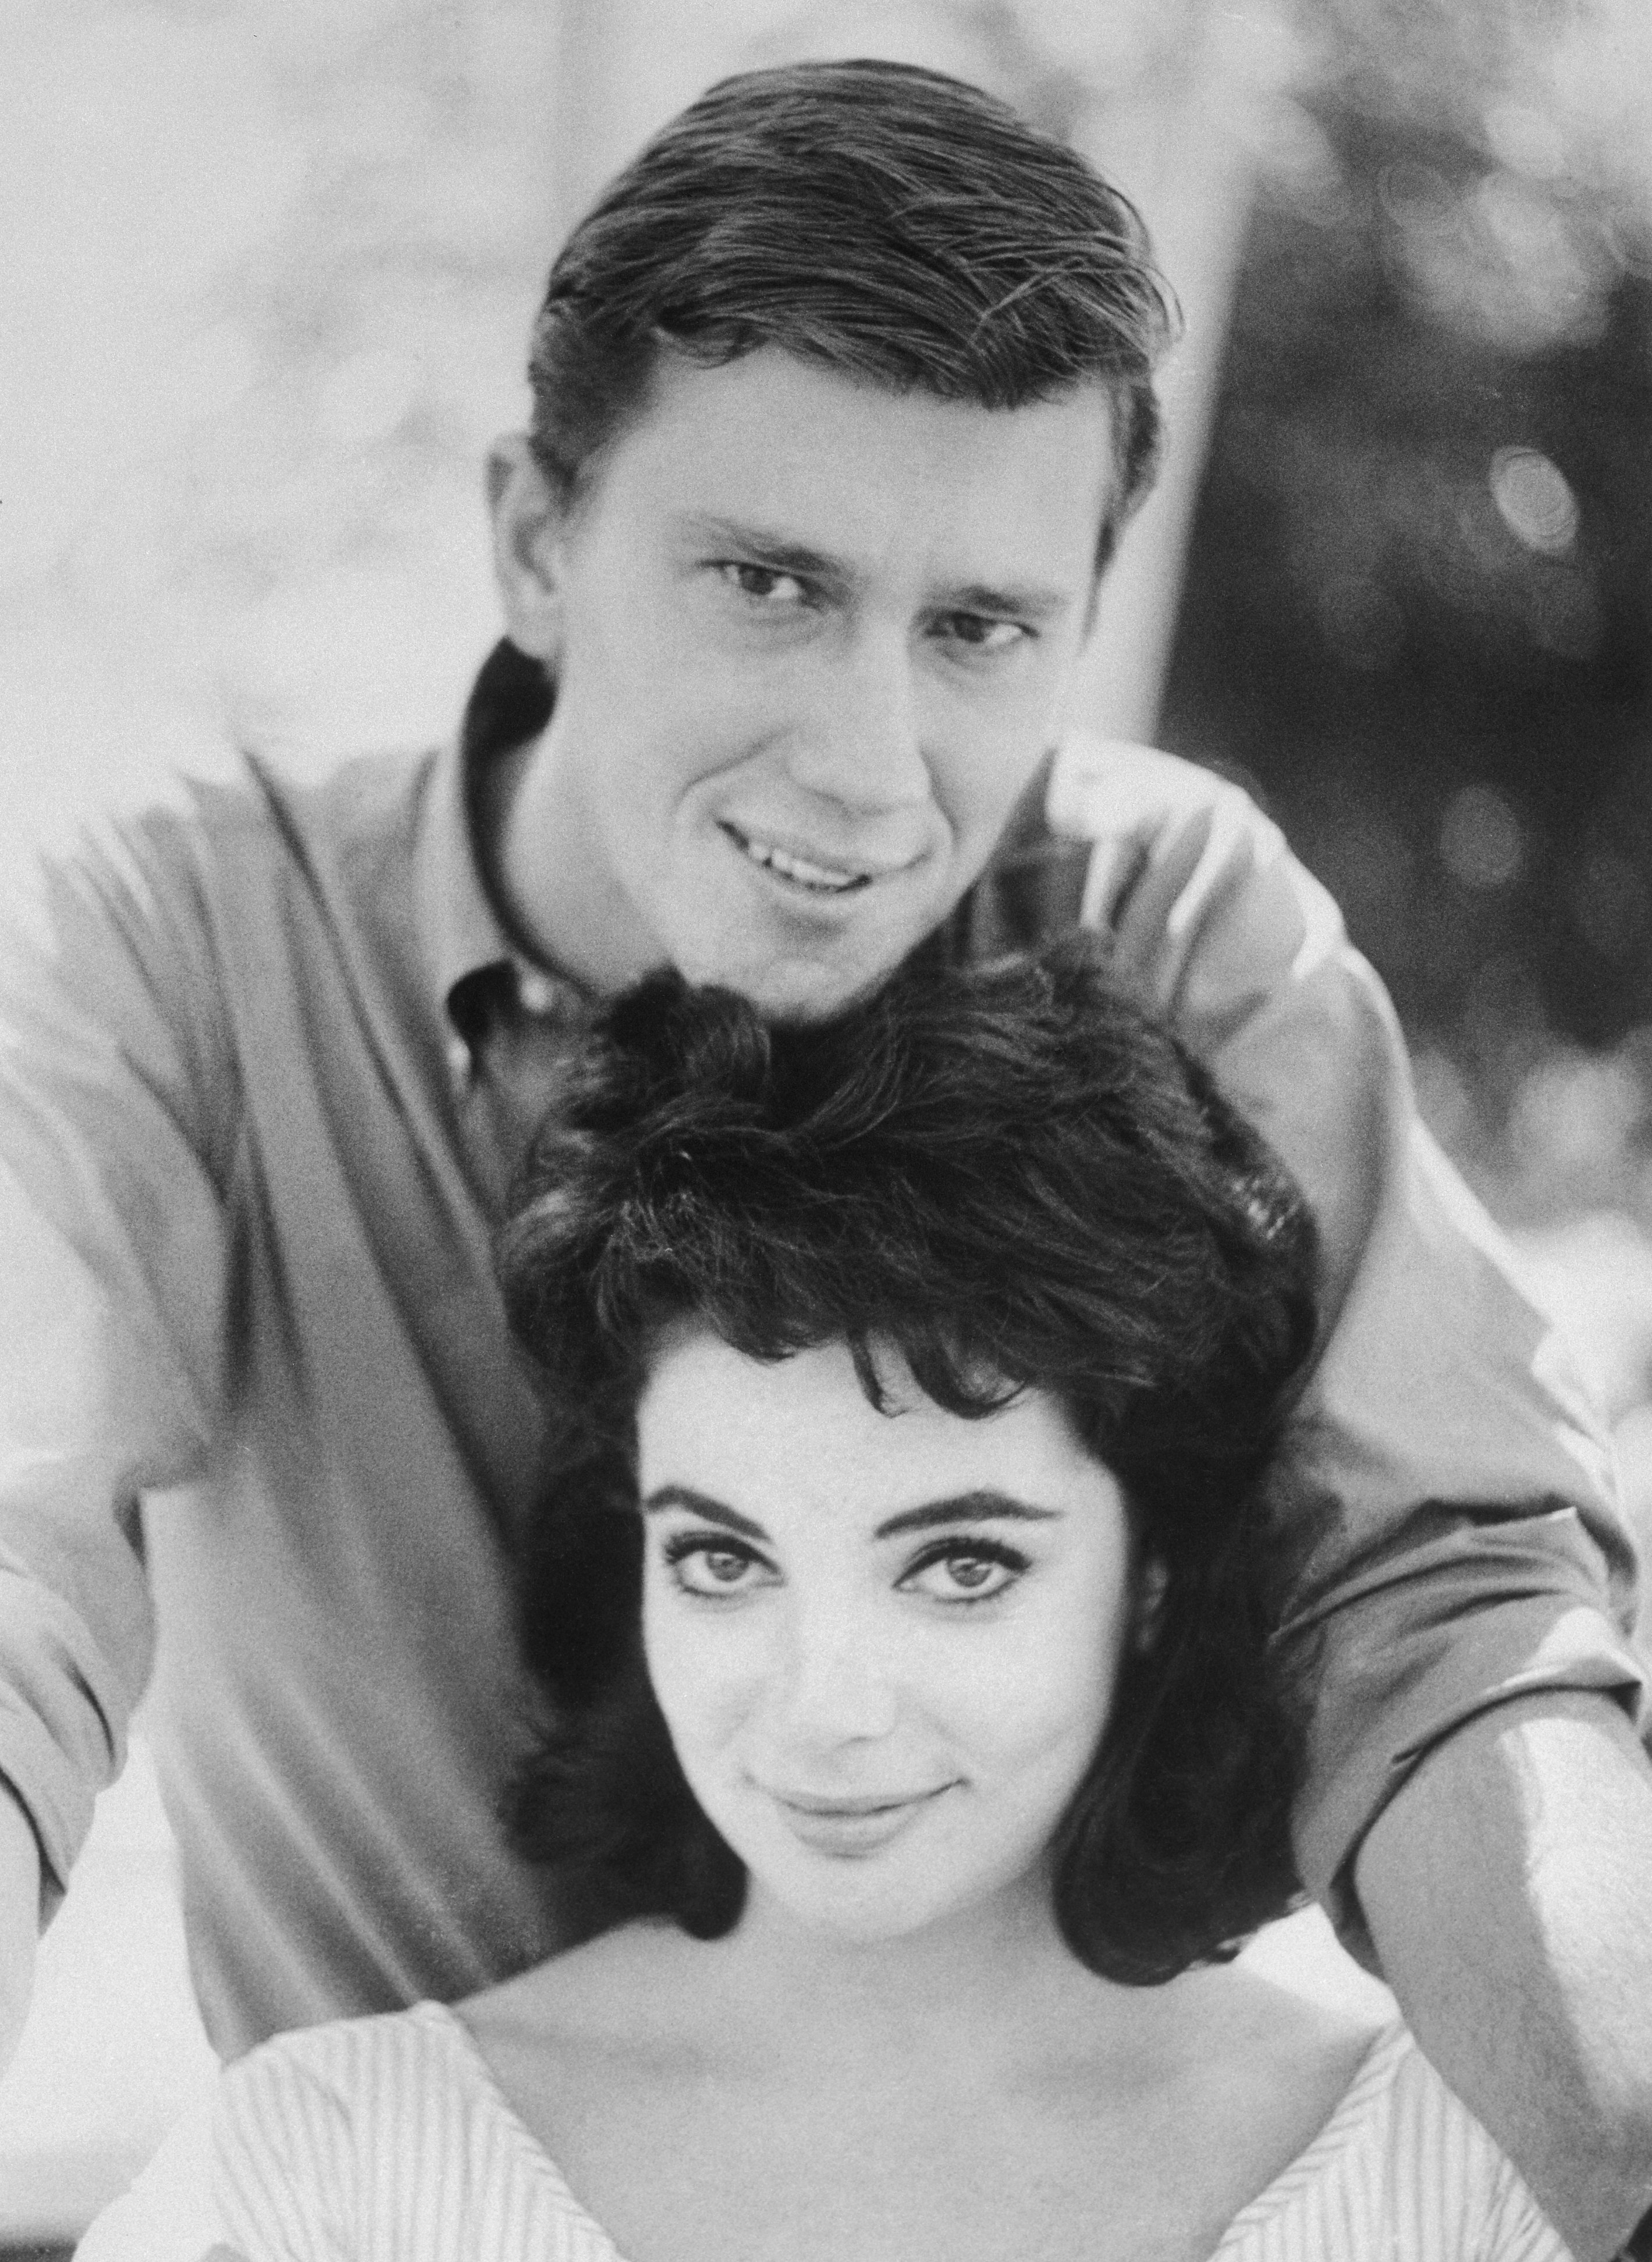 American actor Andrew Prine with girlfriend, actress Karyn 'Cookie' Kupcinet (1941 - 1963), circa 1963 | Source: Getty Images